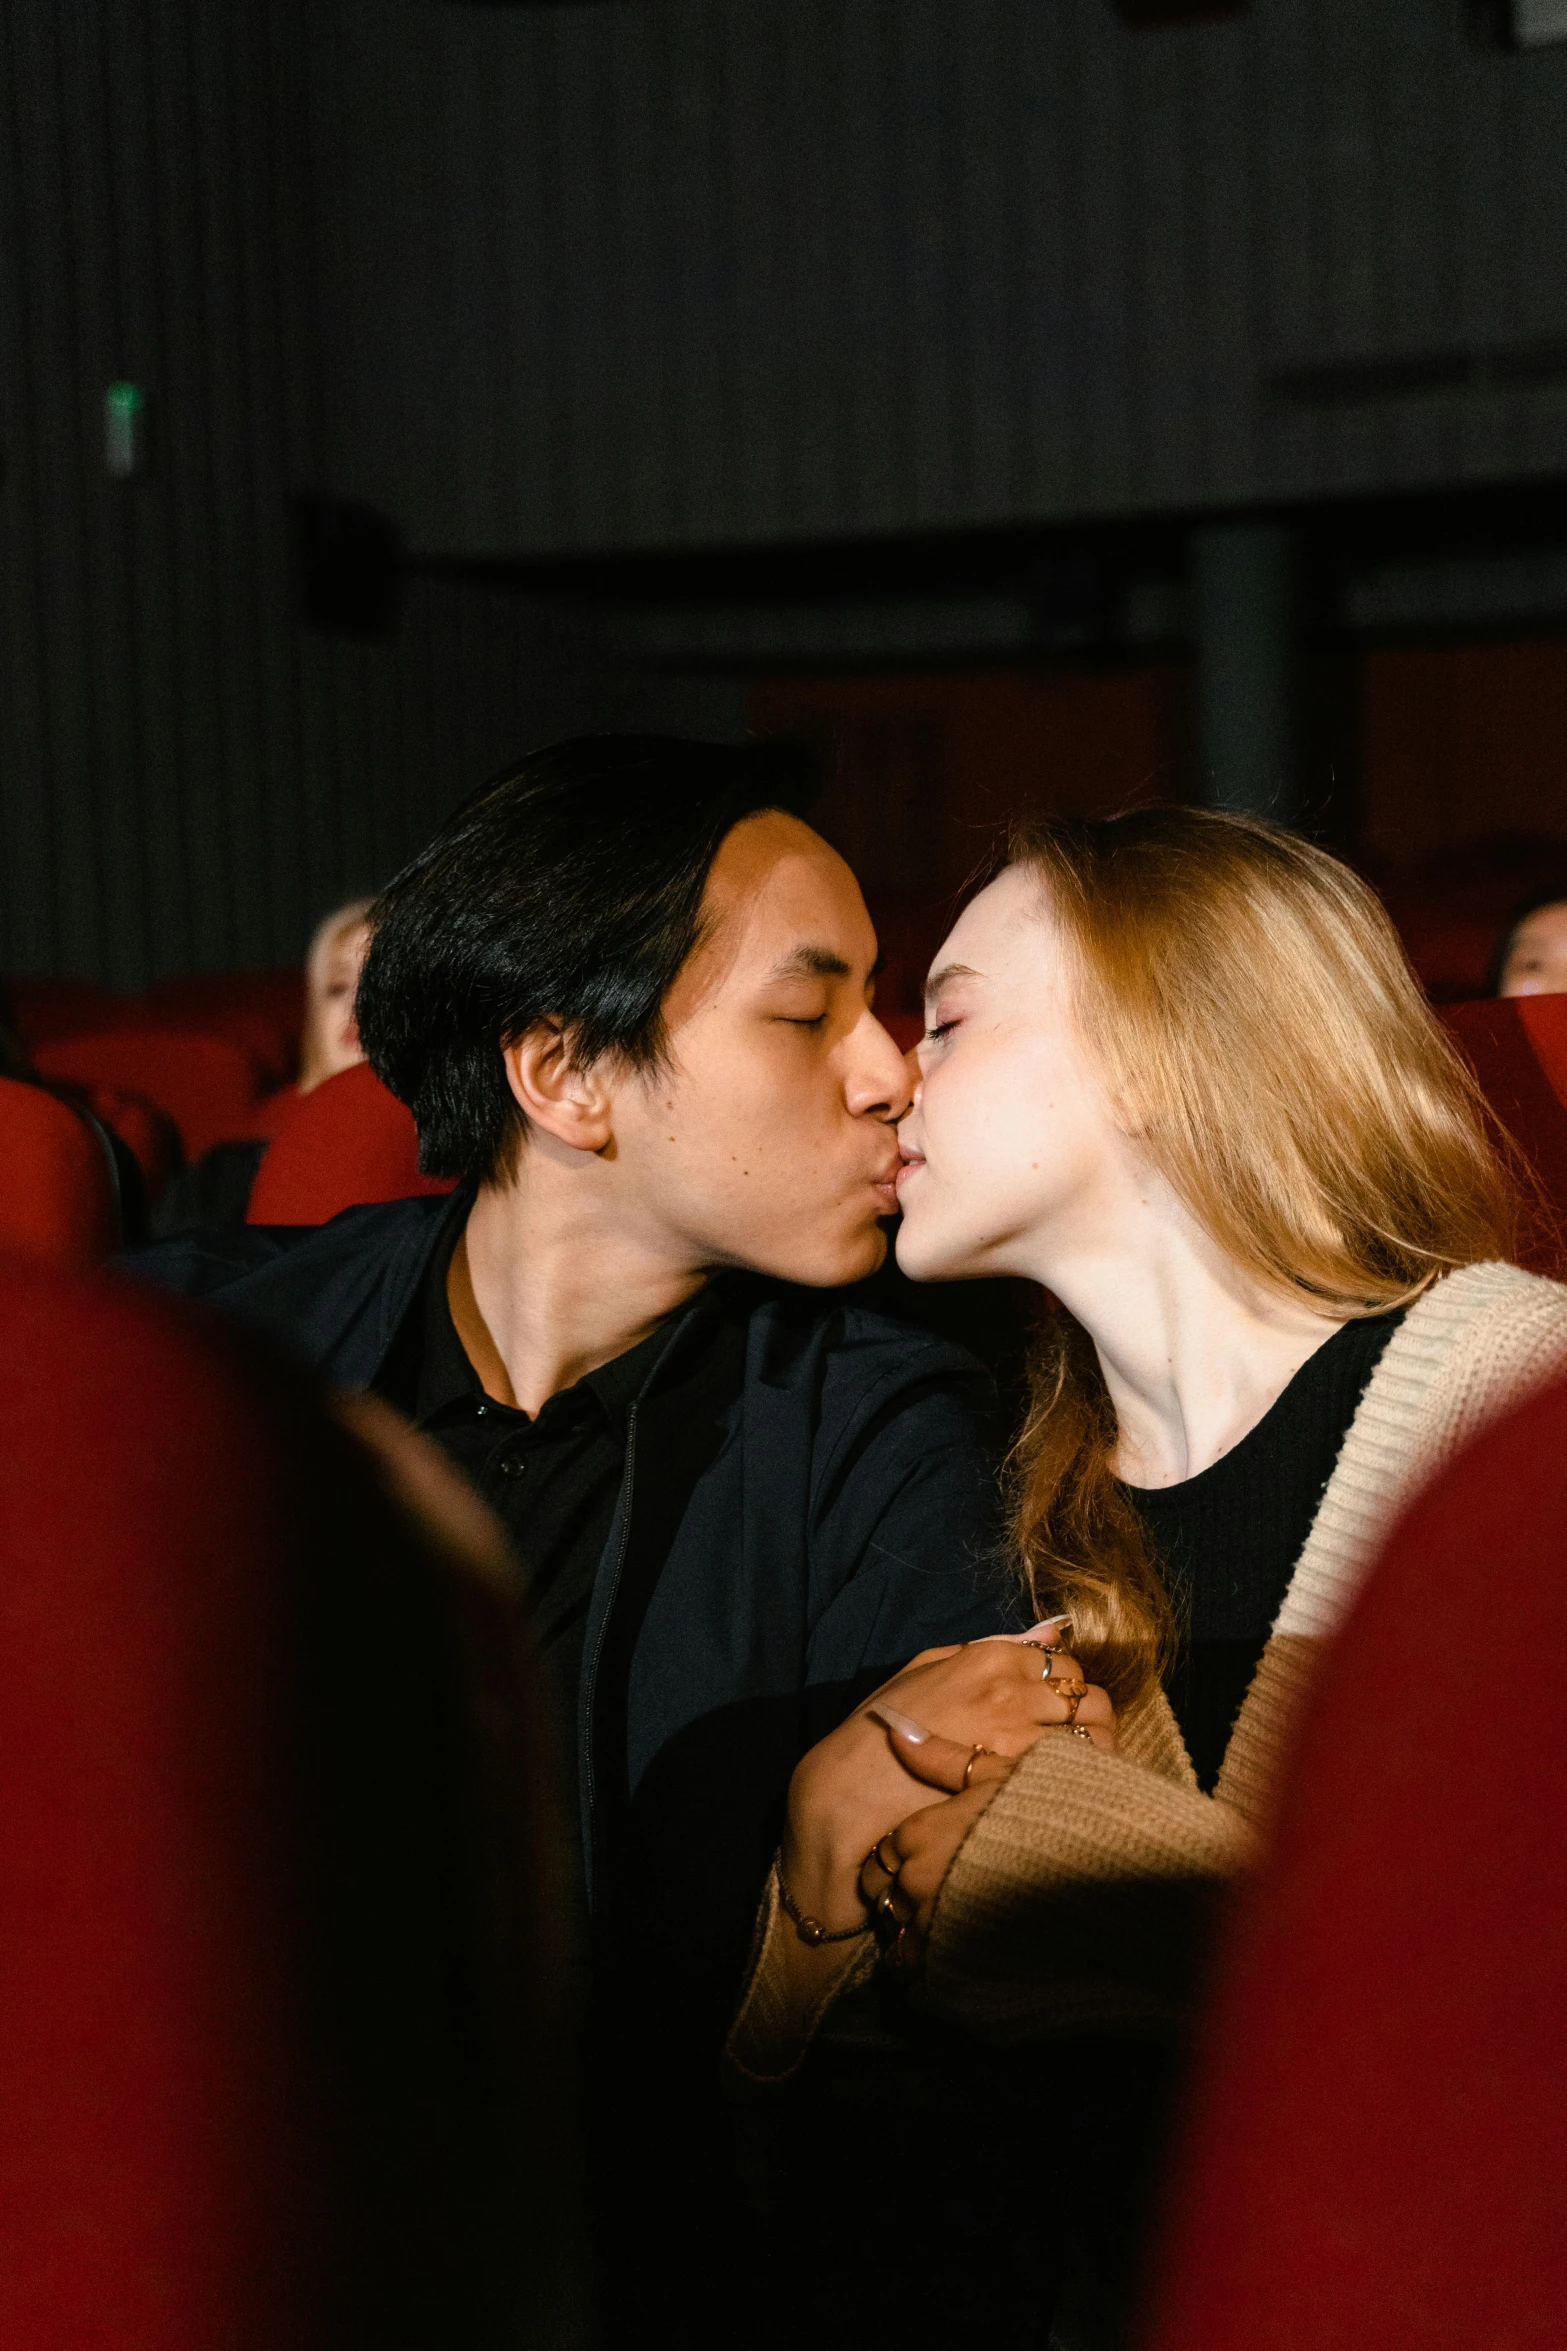 a man and a woman kissing in a movie theater, damien tran, jovana rikalo, high quality upload, julia hetta